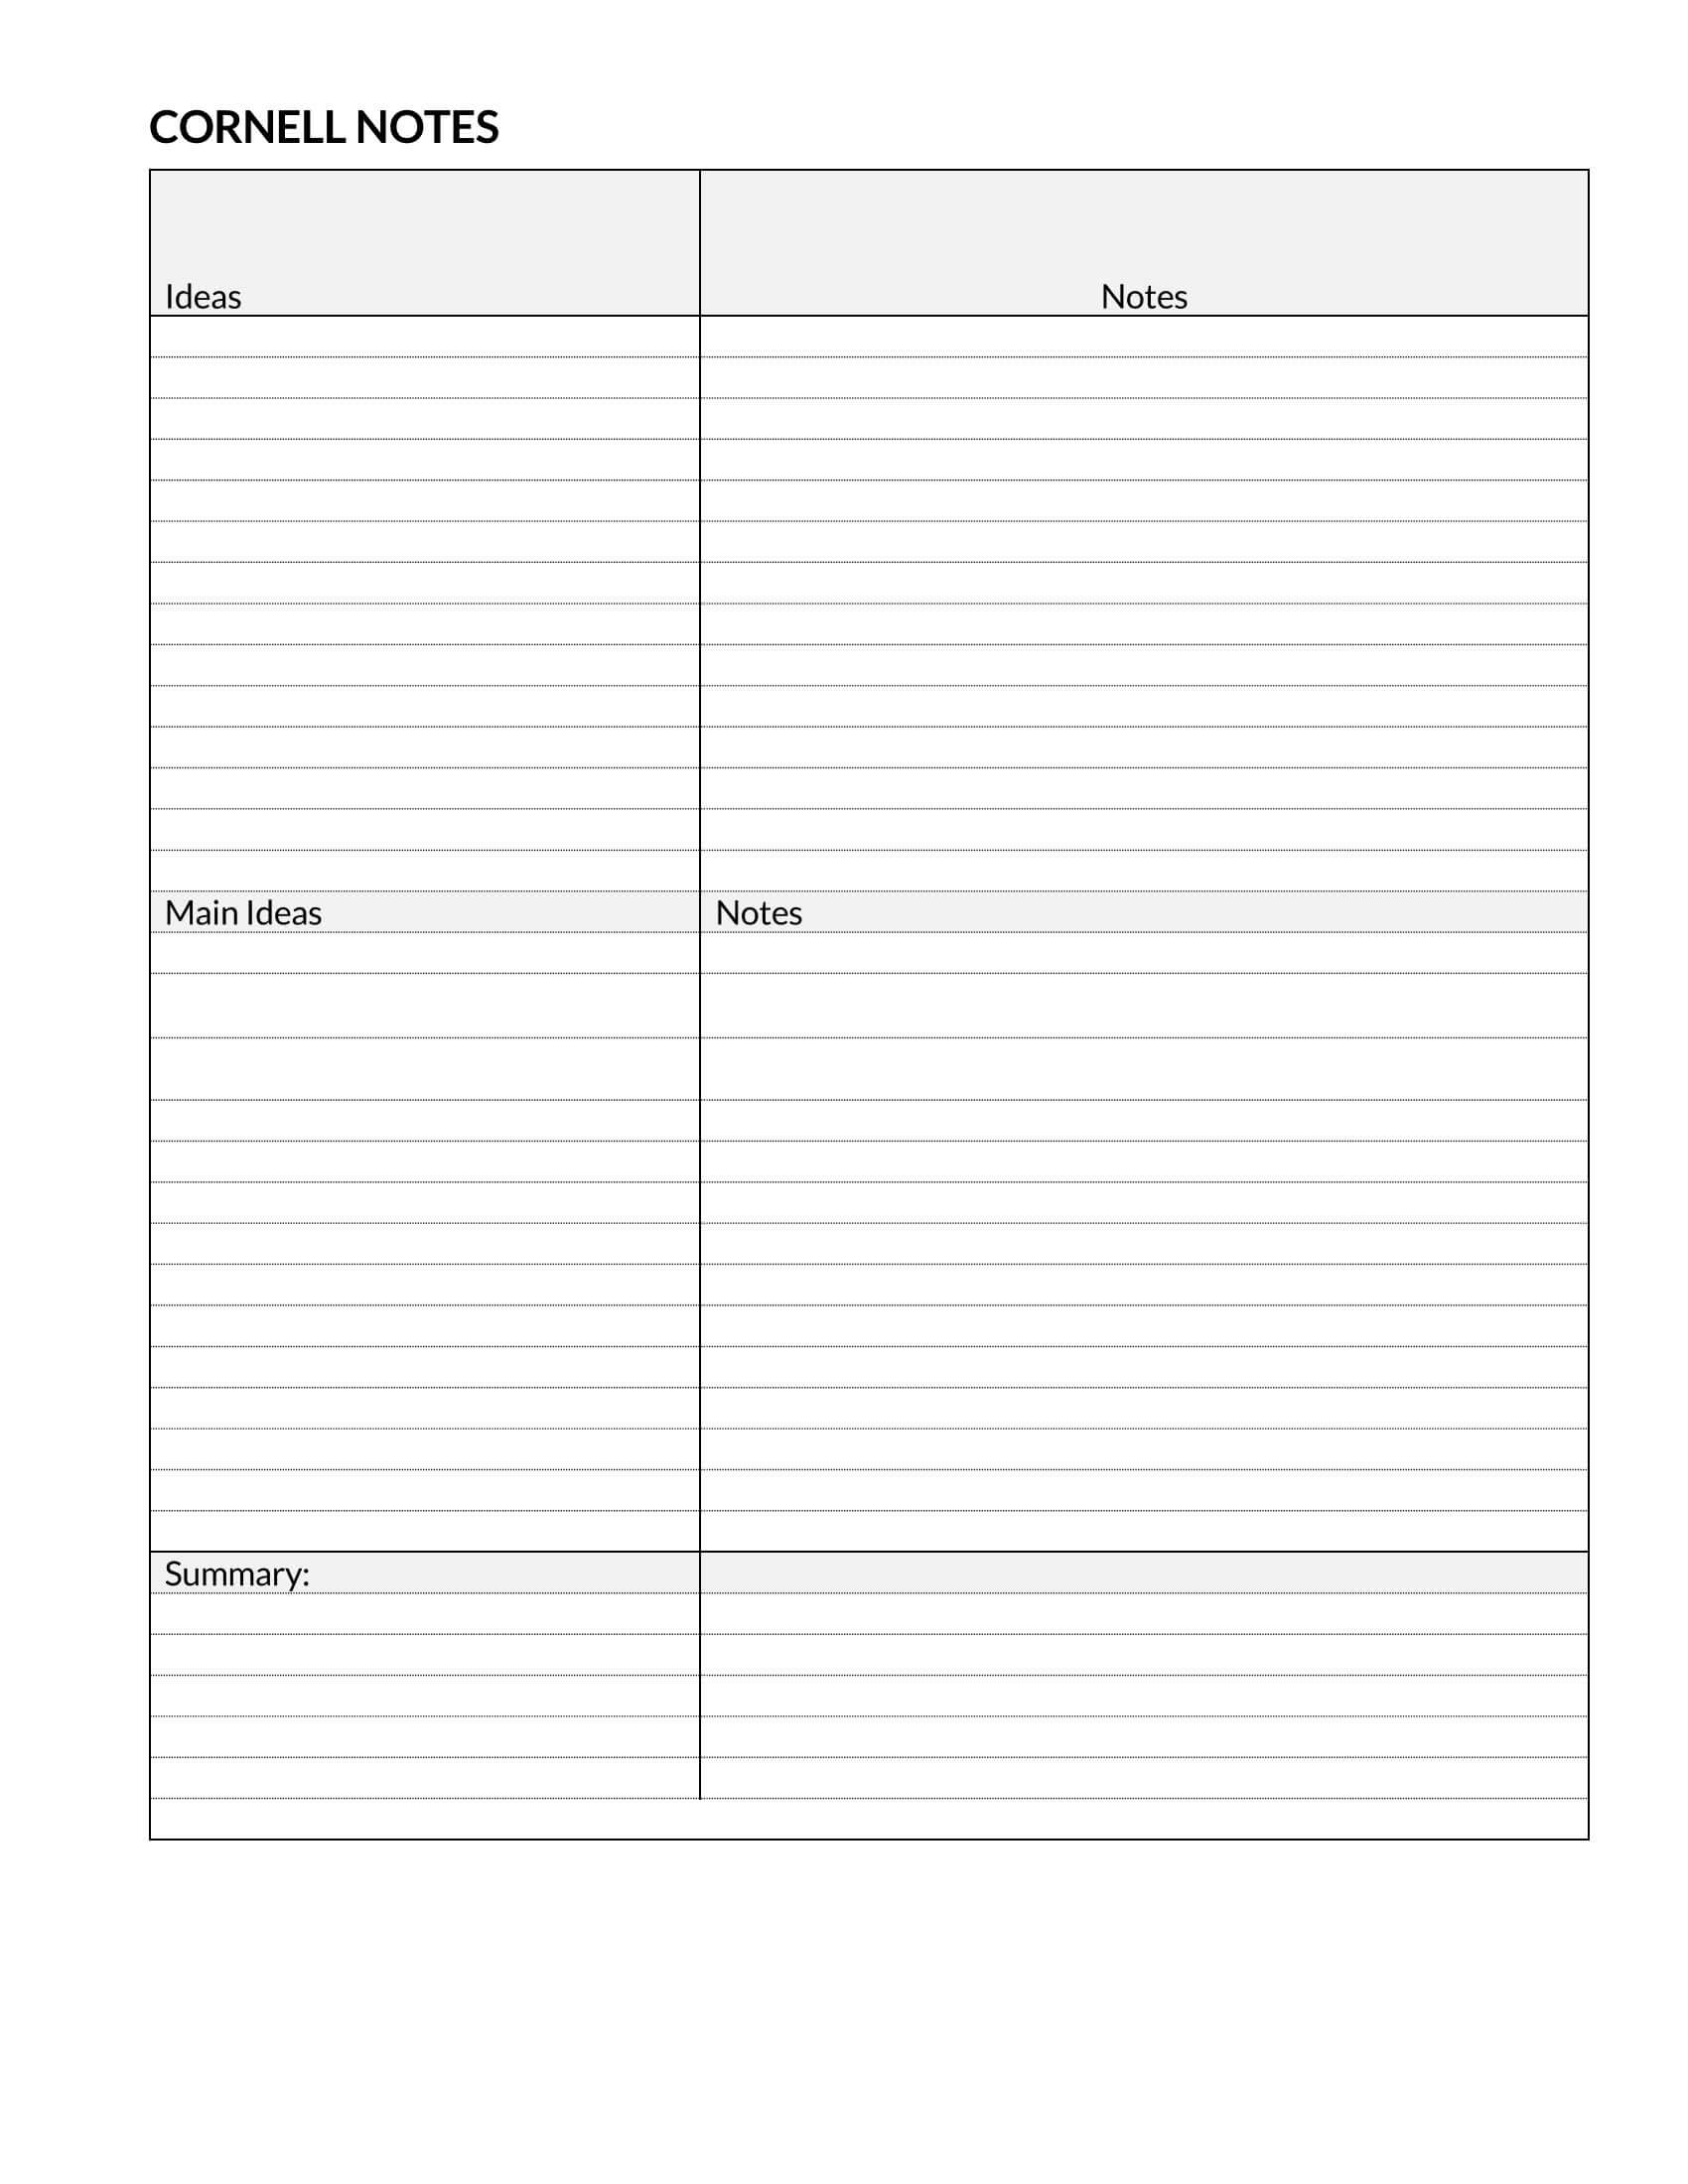 Professional Cornell Note Sample Word